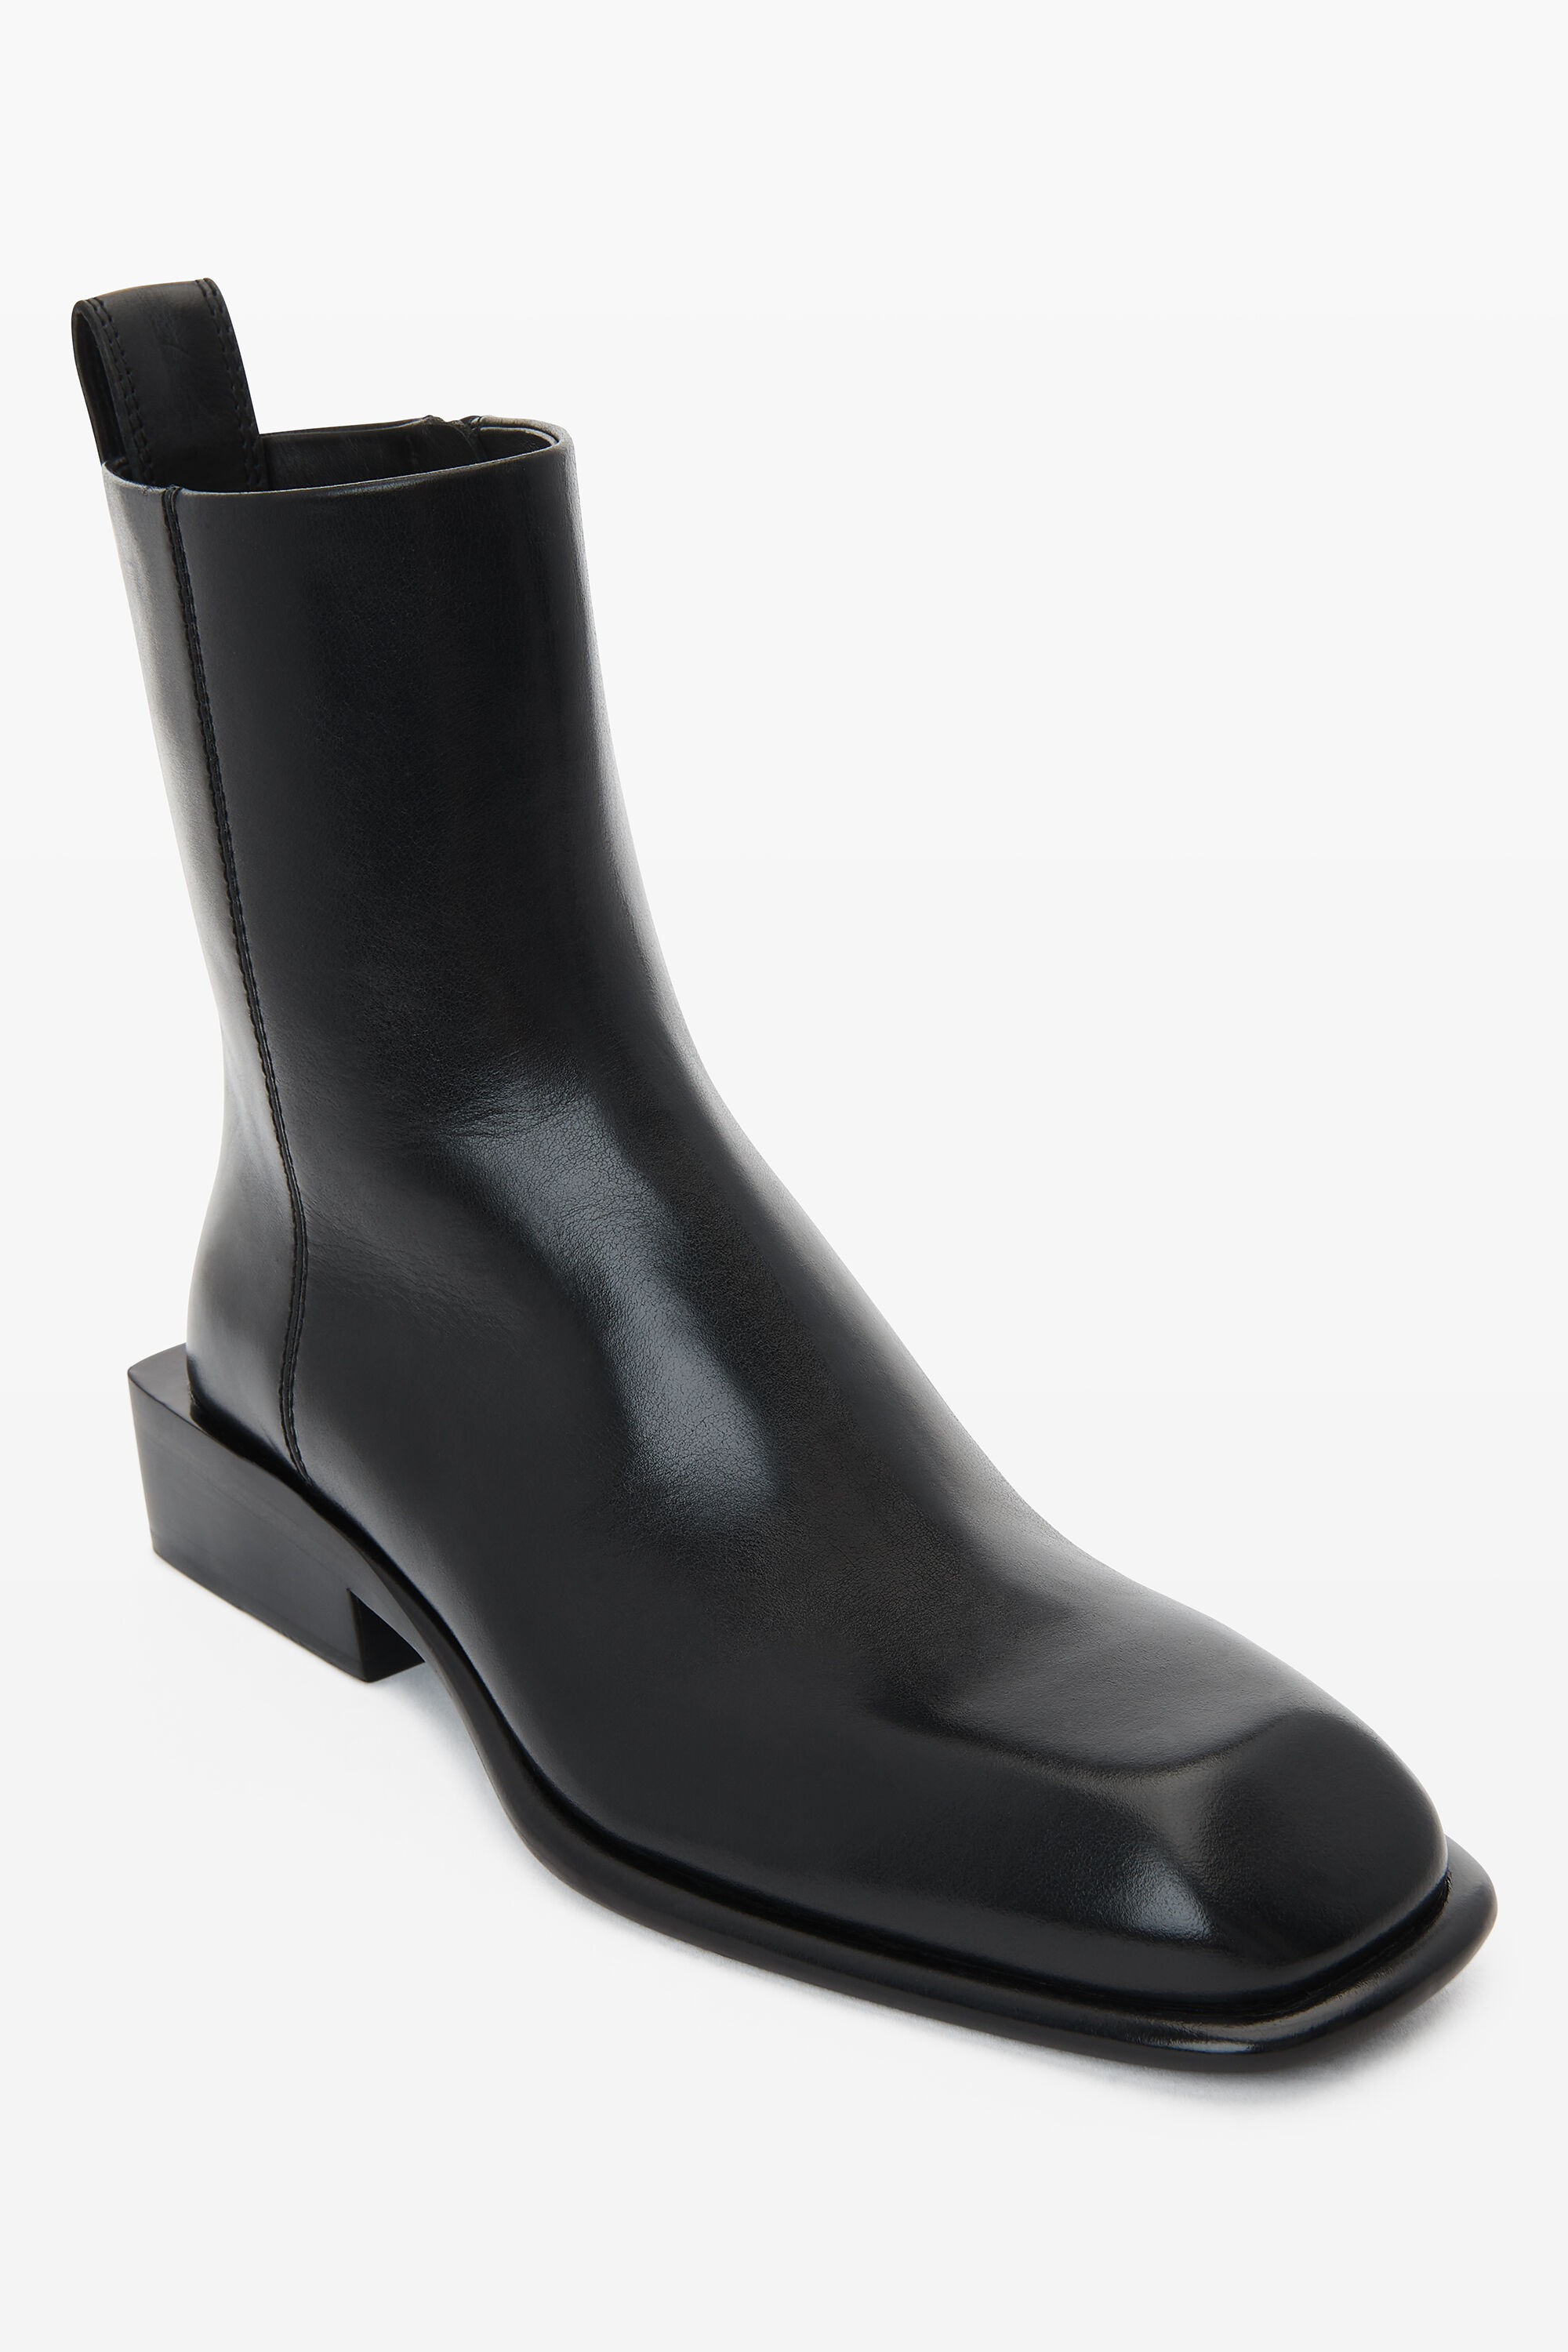 throttle leather ankle boot in BLACK | heel height:35 mm 